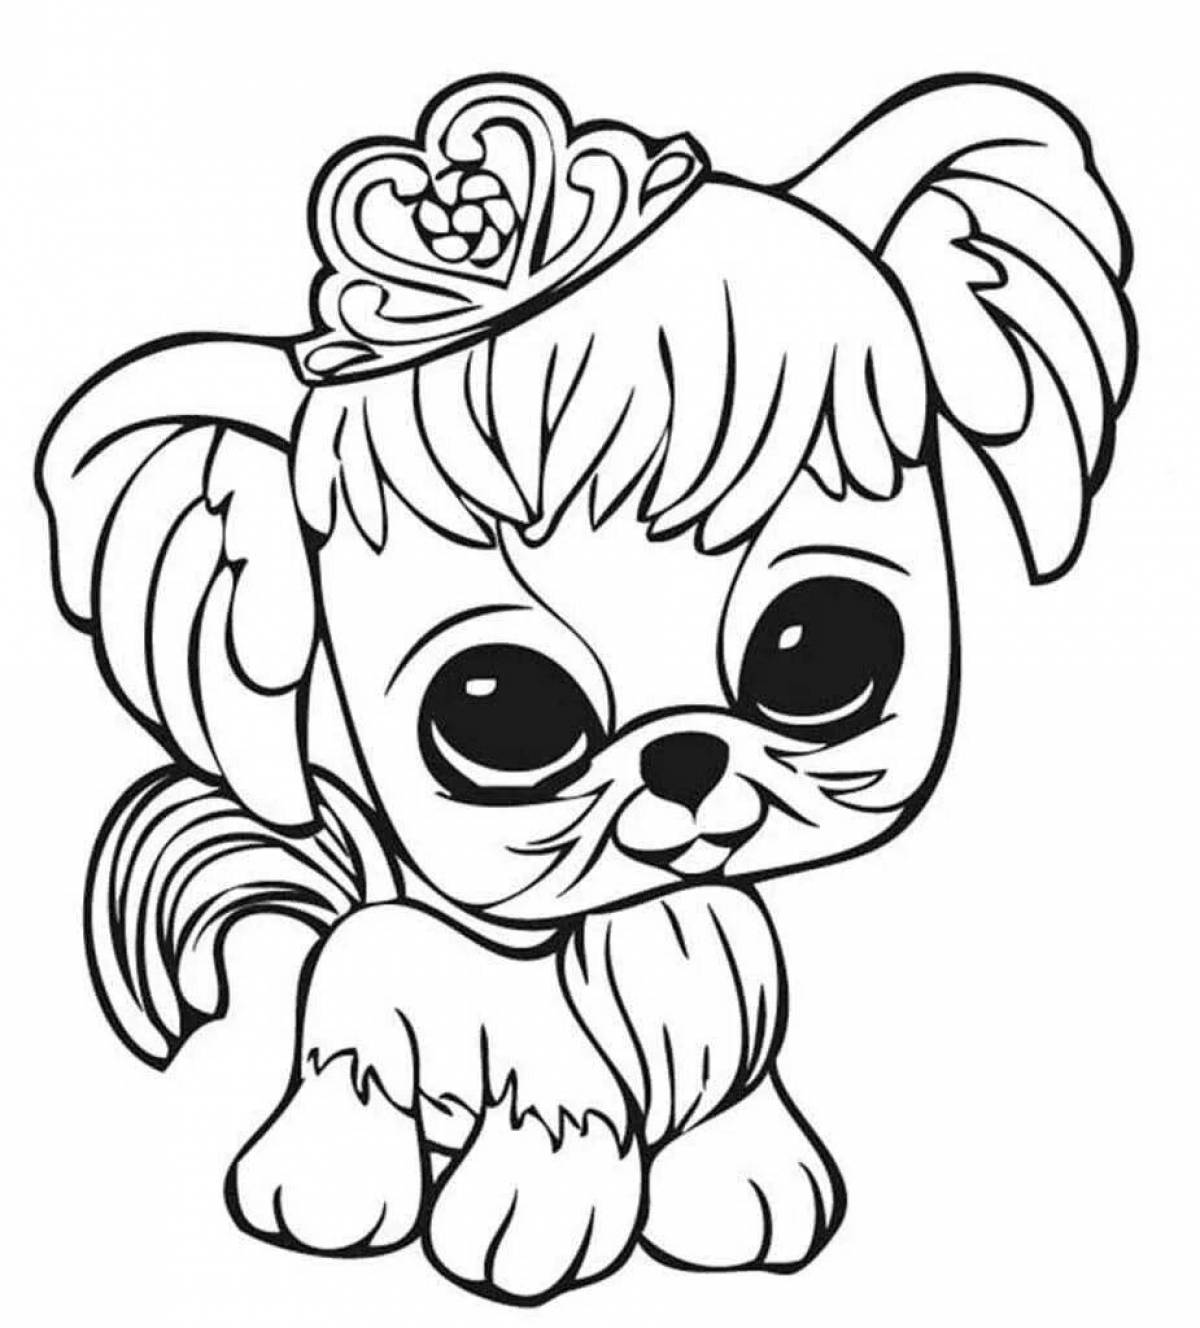 Adorable dog coloring book for girls